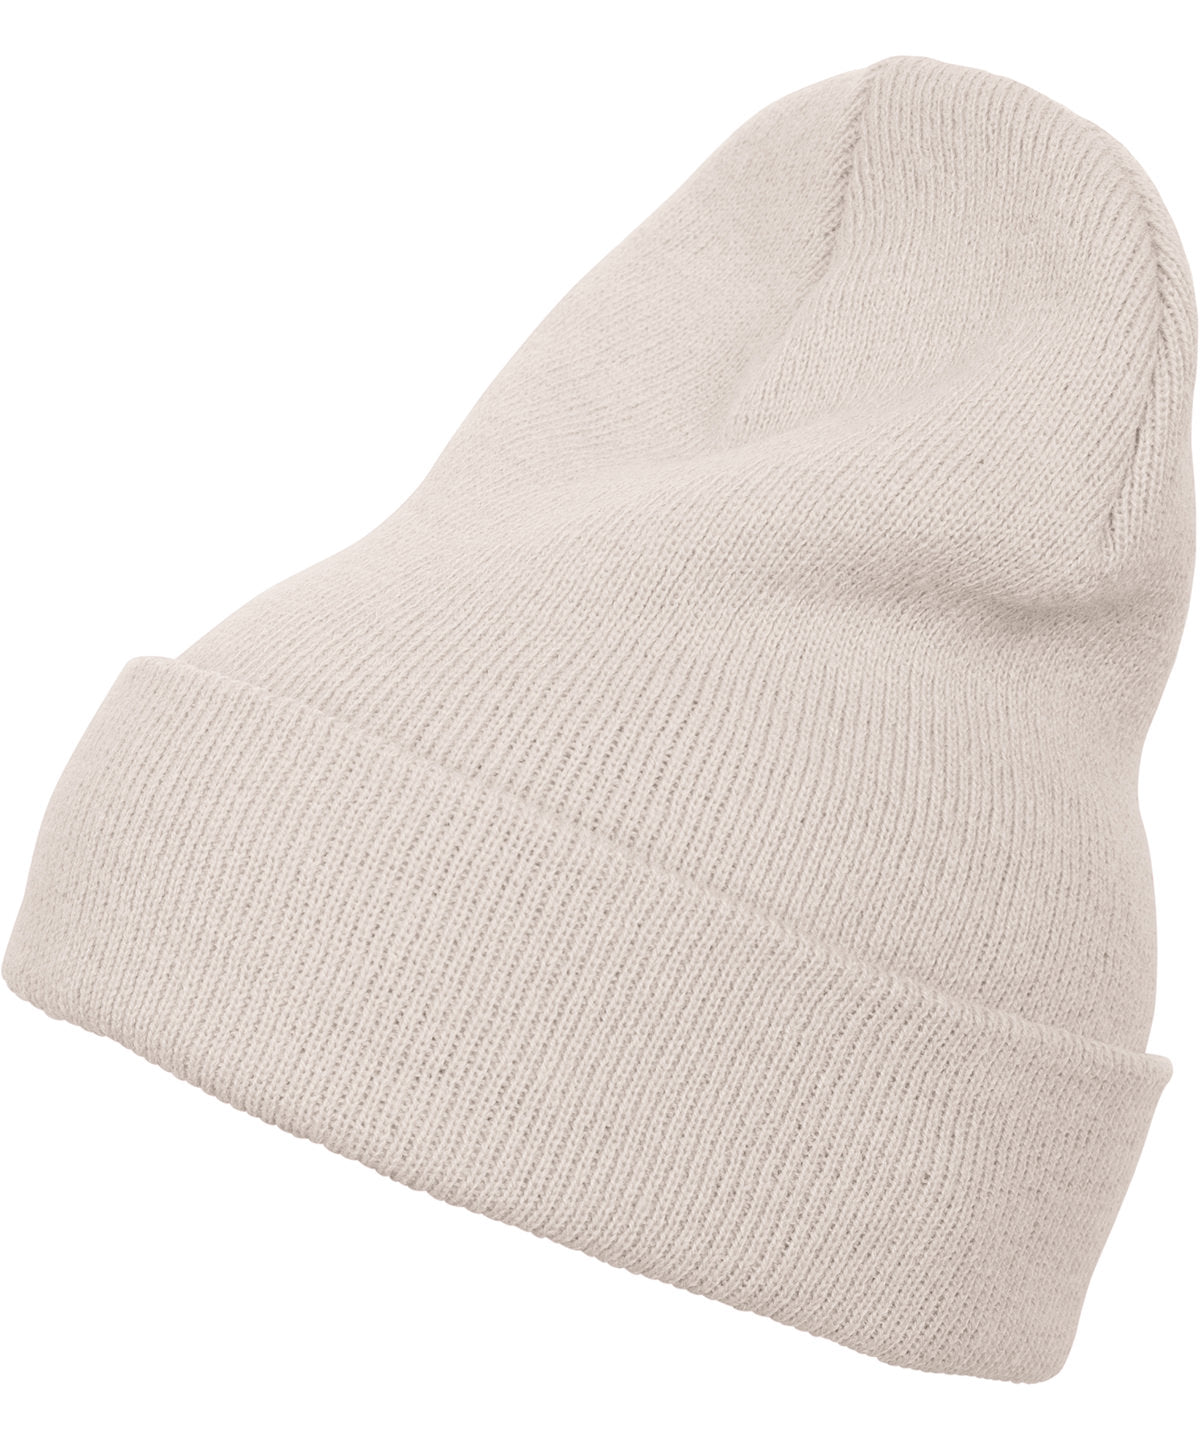 White Sand - Heavyweight long beanie (1501KC) Flexfit by Yupoong  HeadwearMust HavesNew Colours for 2023Winter Essentials